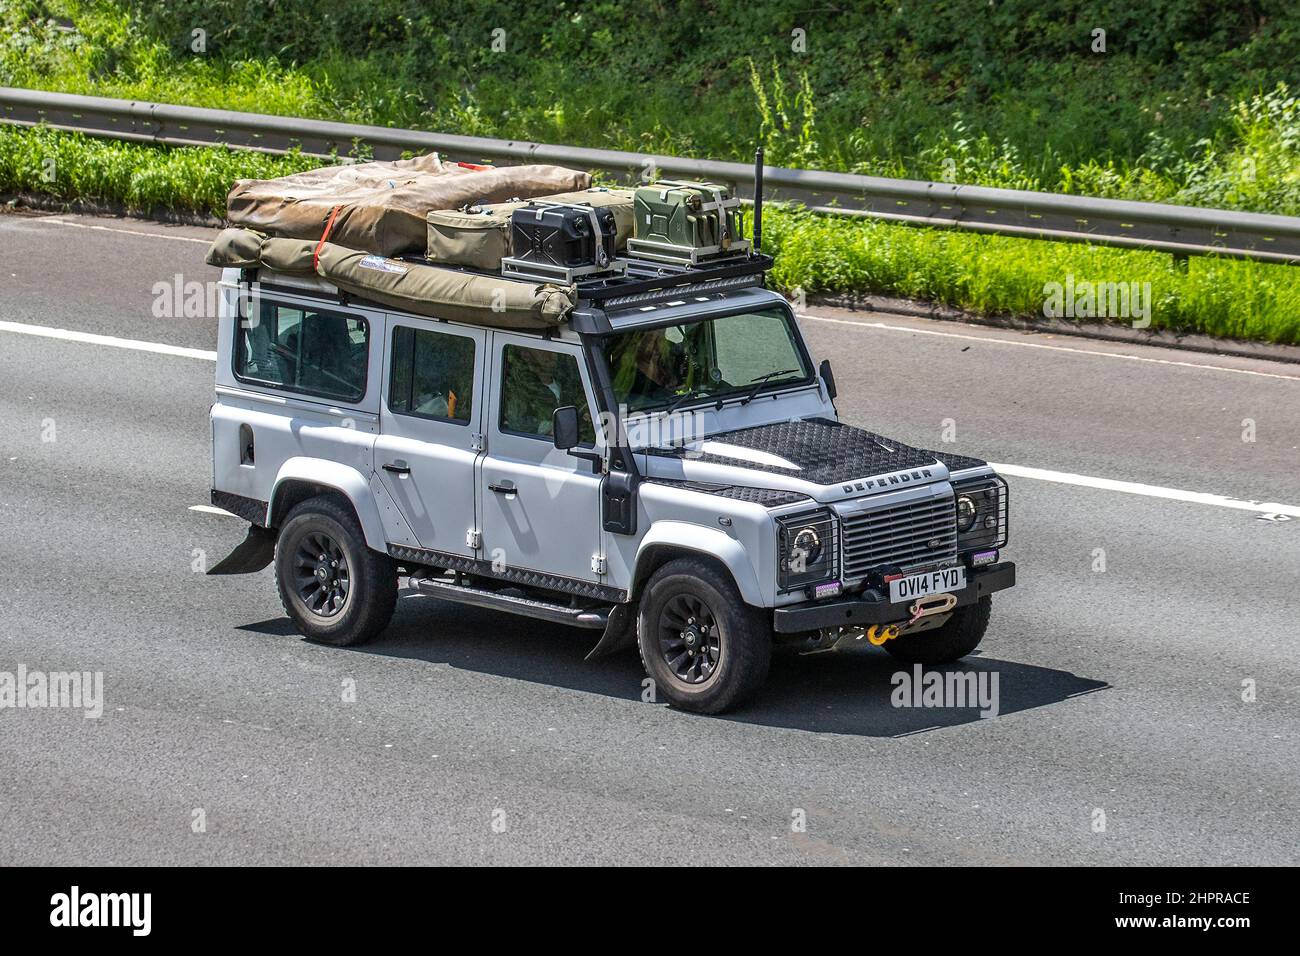 2014 white Land Rover Defender 2198cc 6-speed manual with overland expedition camping gear, spare fuel cans, winch and canvas tents. Stock Photo